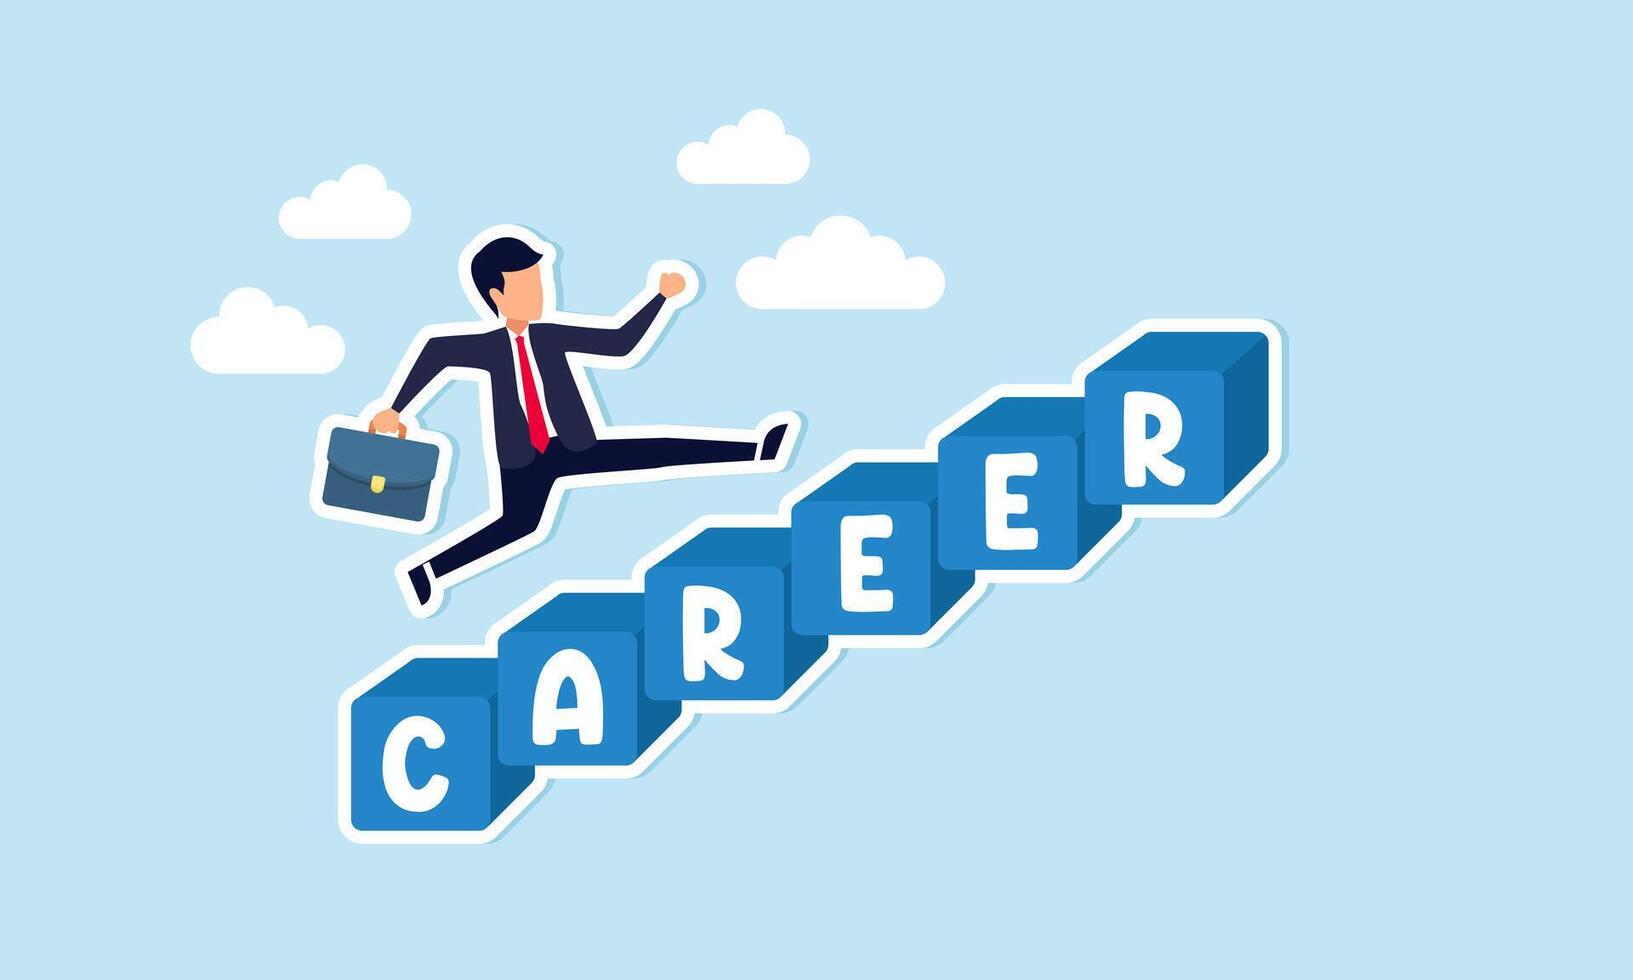 Career advancement personal growth, job promotion, experience, and increased responsibilities concept, smart confident businessman running fast on career stairway rising up to achieve success. vector